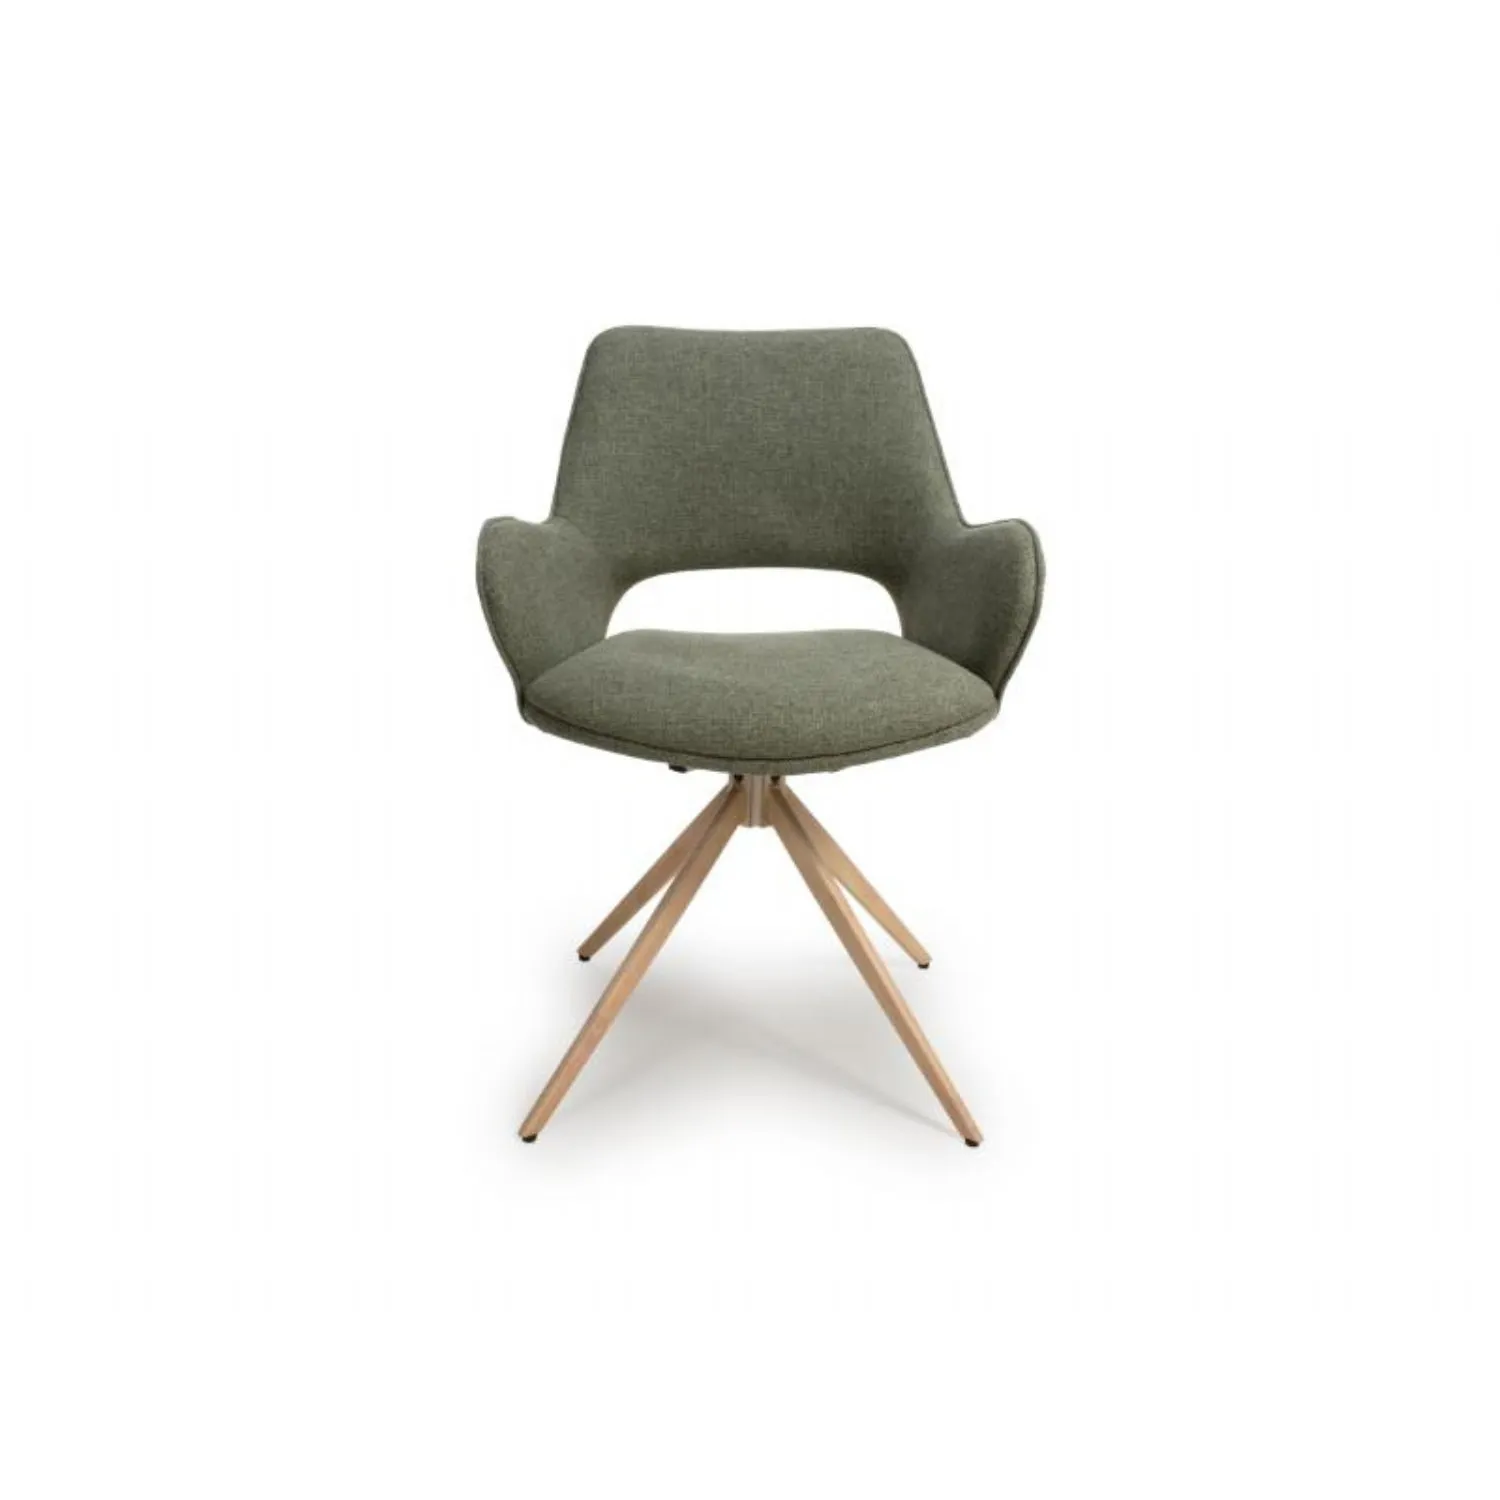 Perth Swivel Chair Sage (Sold in 2's)